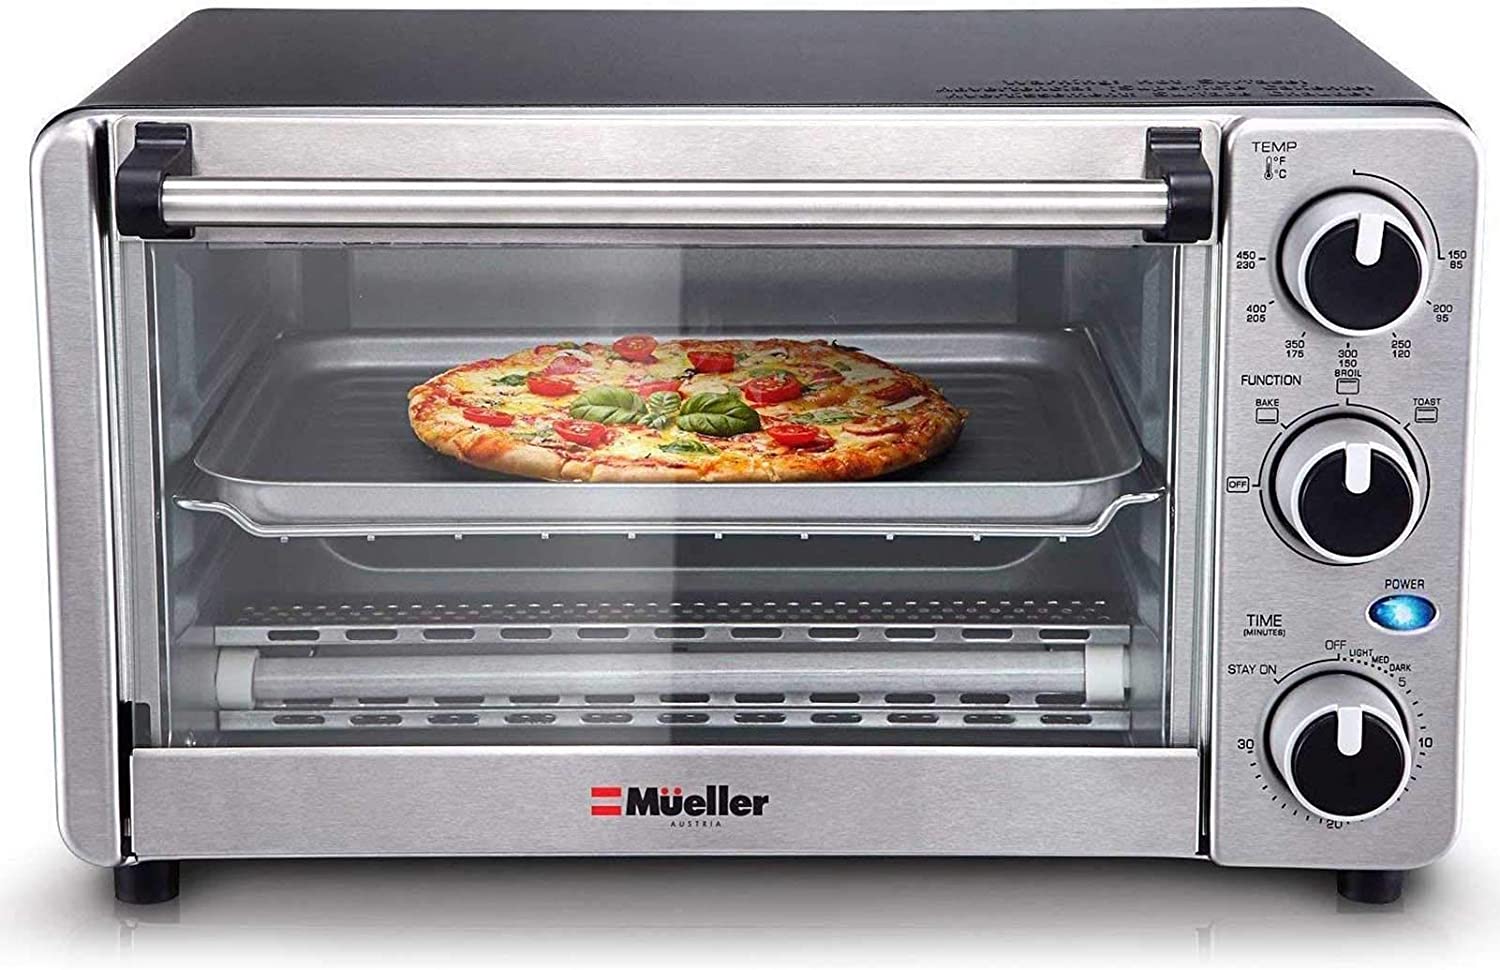 Mueller Austria Toaster Oven 4 Slice, Multi-function Stainless Steel Finish  with Timer - Toast - Bake - Broil Settings, Natural Convection - 1100